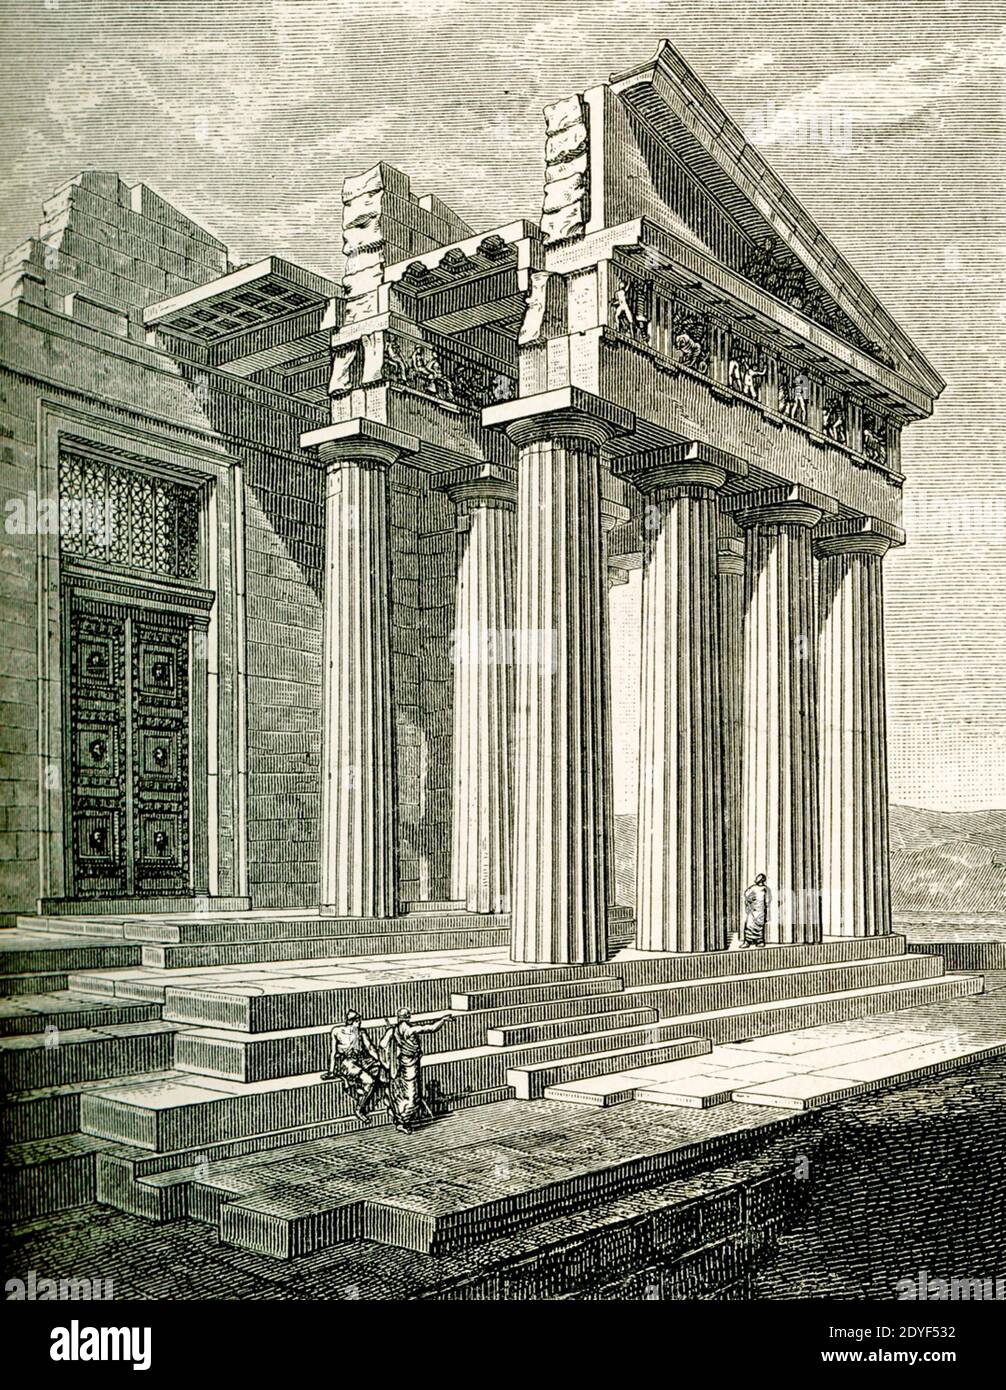 Sectional view of the east end of the Parthenon after Niemann. Northeast Corner of the Parthenon reconstructed by G Niemann with but little restoration from existing remains. On the gable front of the roof, the open triangular space (the pediment() of which was filled with the sculptures brought by Lord Elgin to England and now in the British Museum. For the ancient Greeks, the Parthenon served as a temple to the  goddess Athena. Completed in 432 B.C., it stood on the Acropolis in Athens. Within, at the west end of the nave, stood a 40-foot high statue of Athena Parthenos (Parthenos means 'mai Stock Photo